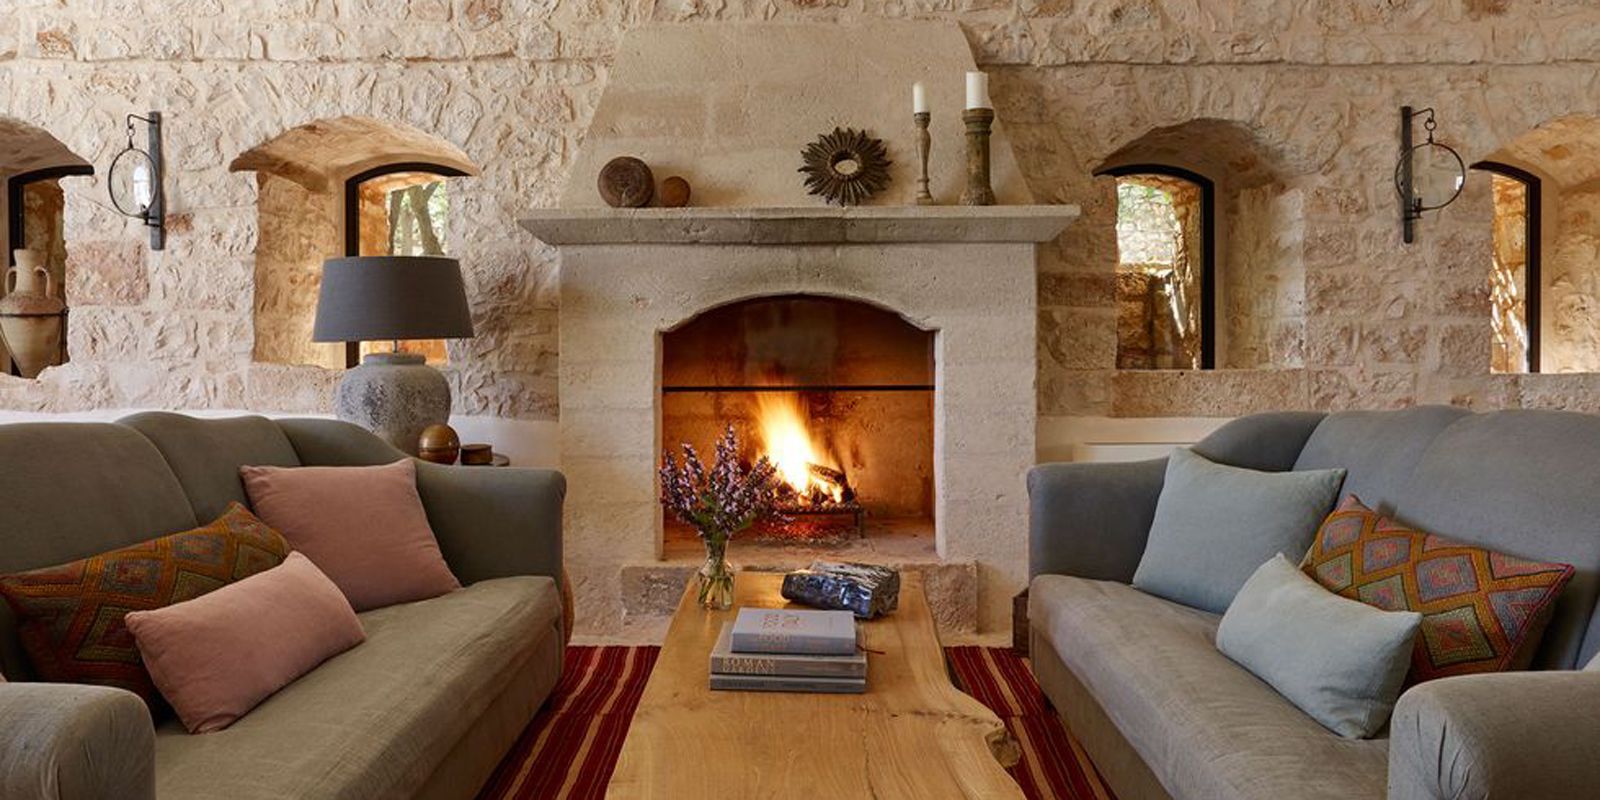 How To Arrange Furniture Around A Fireplace